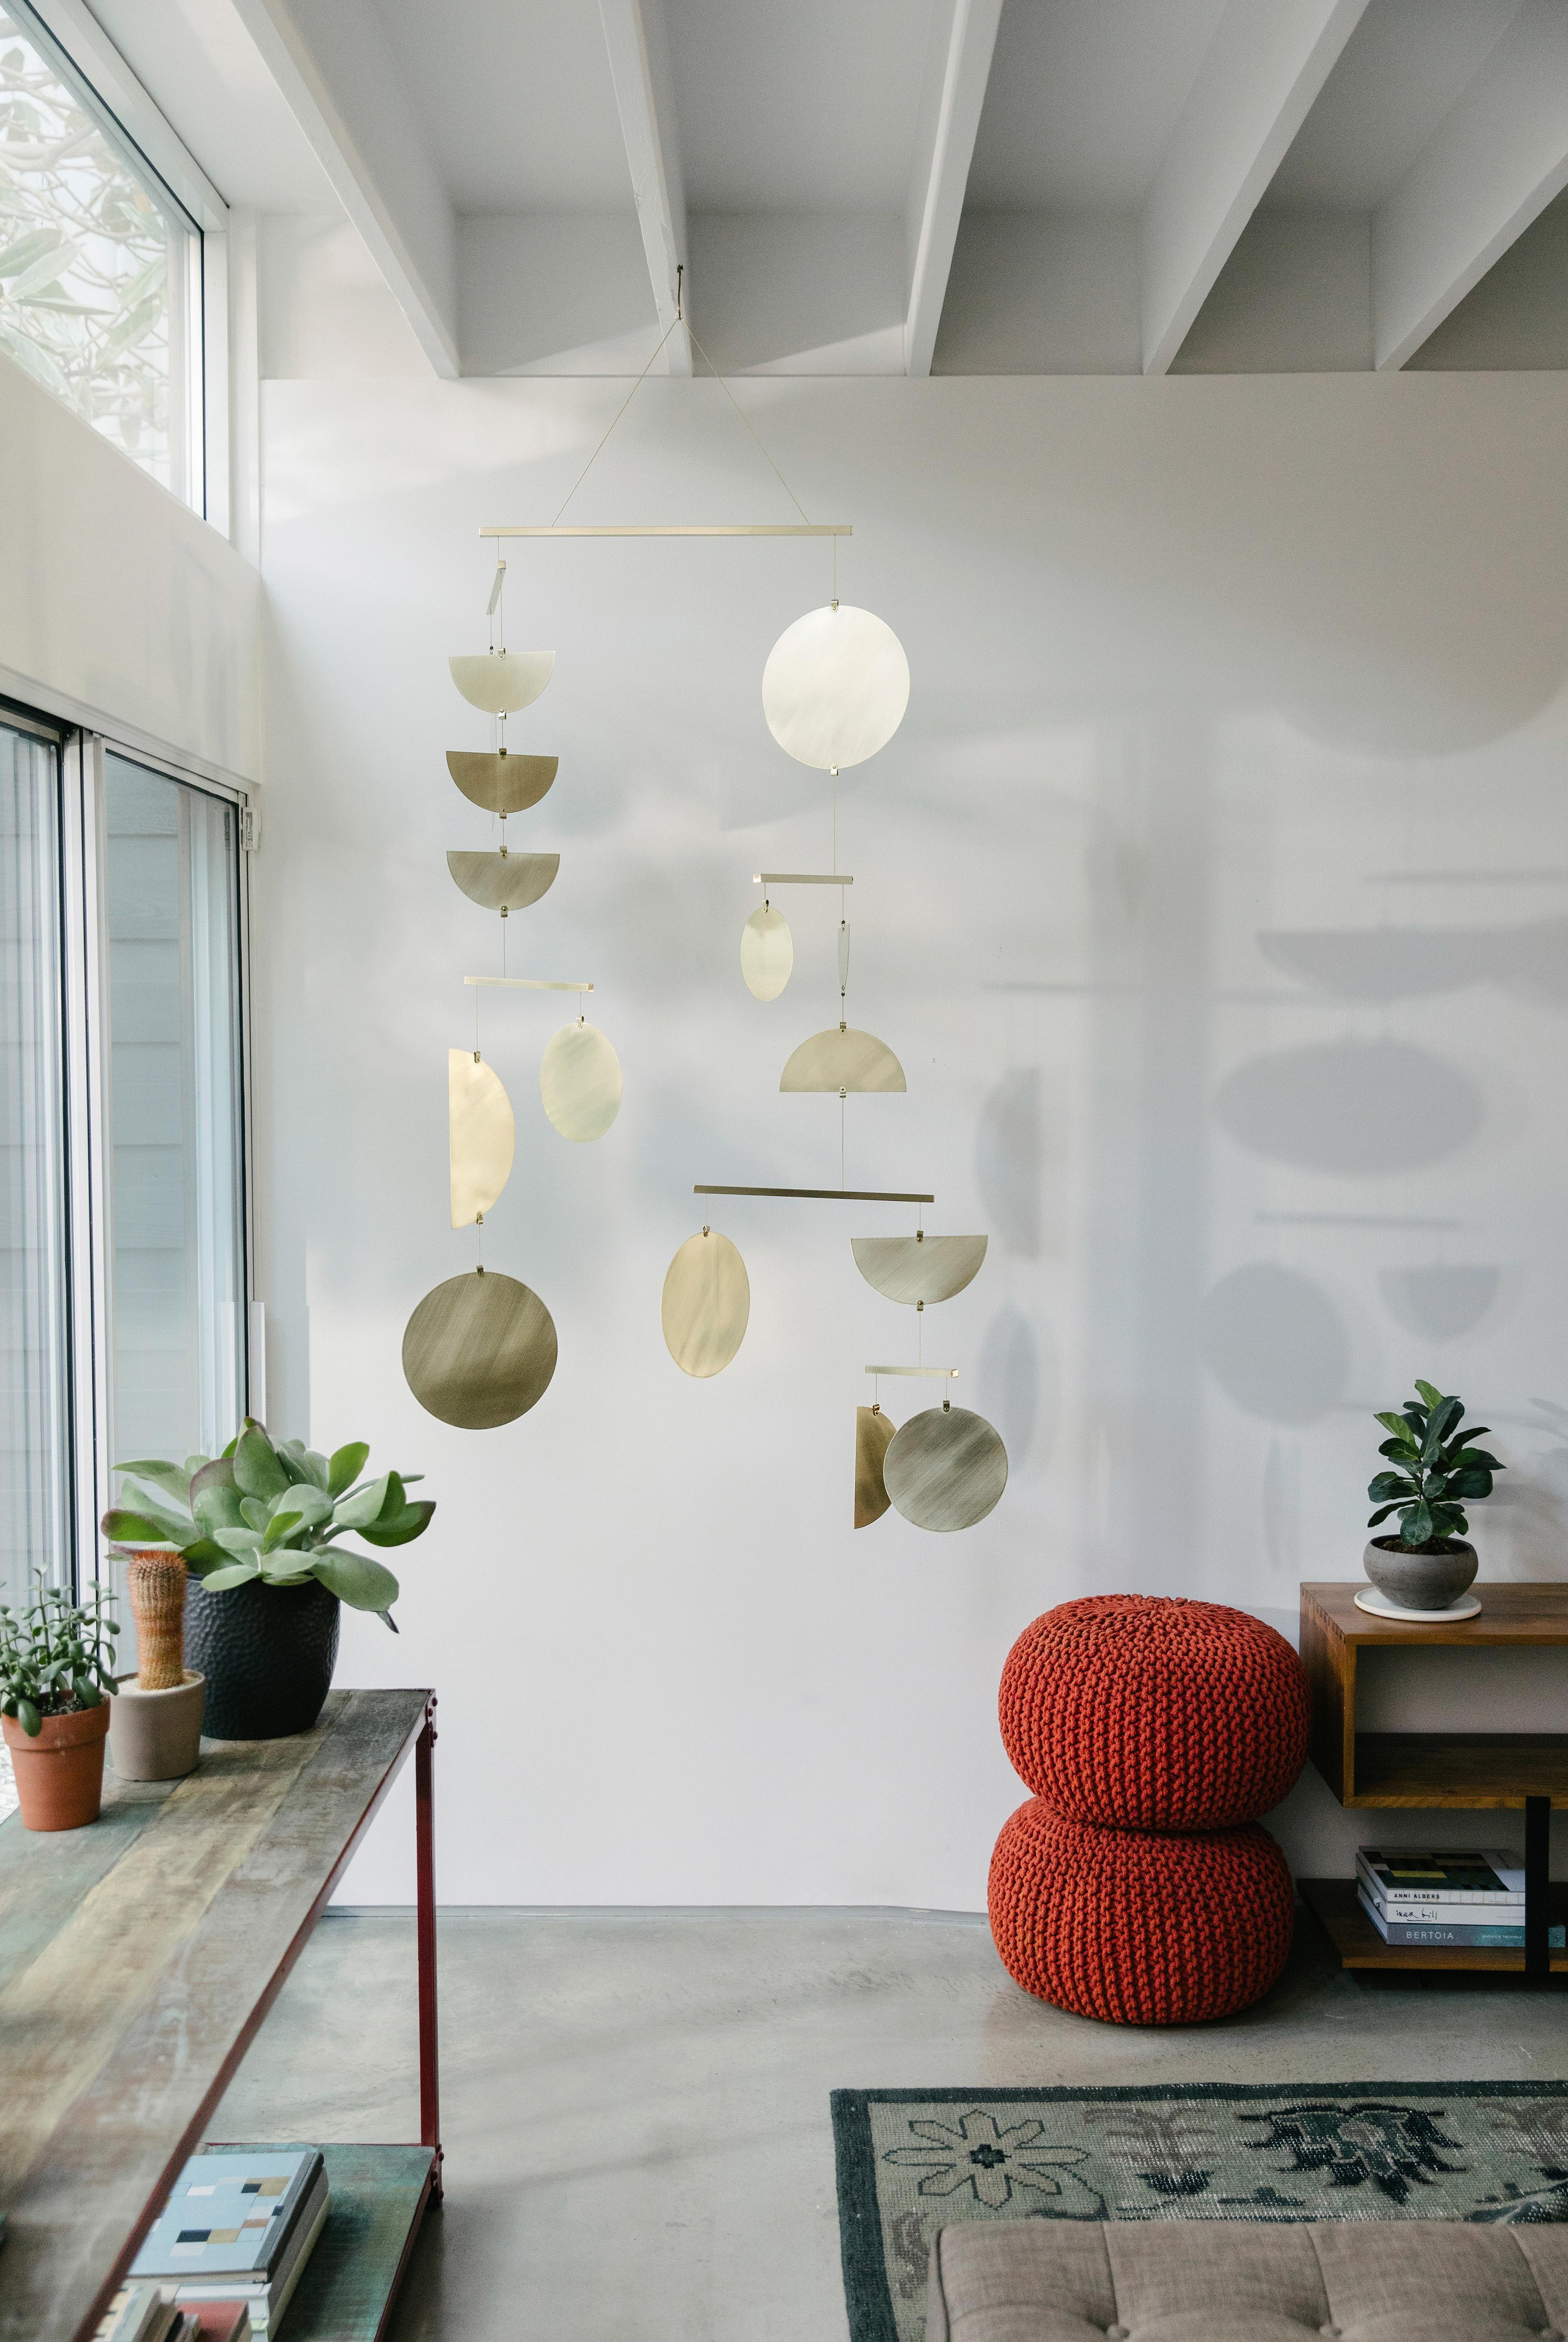 Available in three finishes, the Continuum Mobile is our most stunning mobile in both design and scale with visually cacophonous clusters of shapes that artfully glide between each other. This statement piece is ideal for large open spaces and